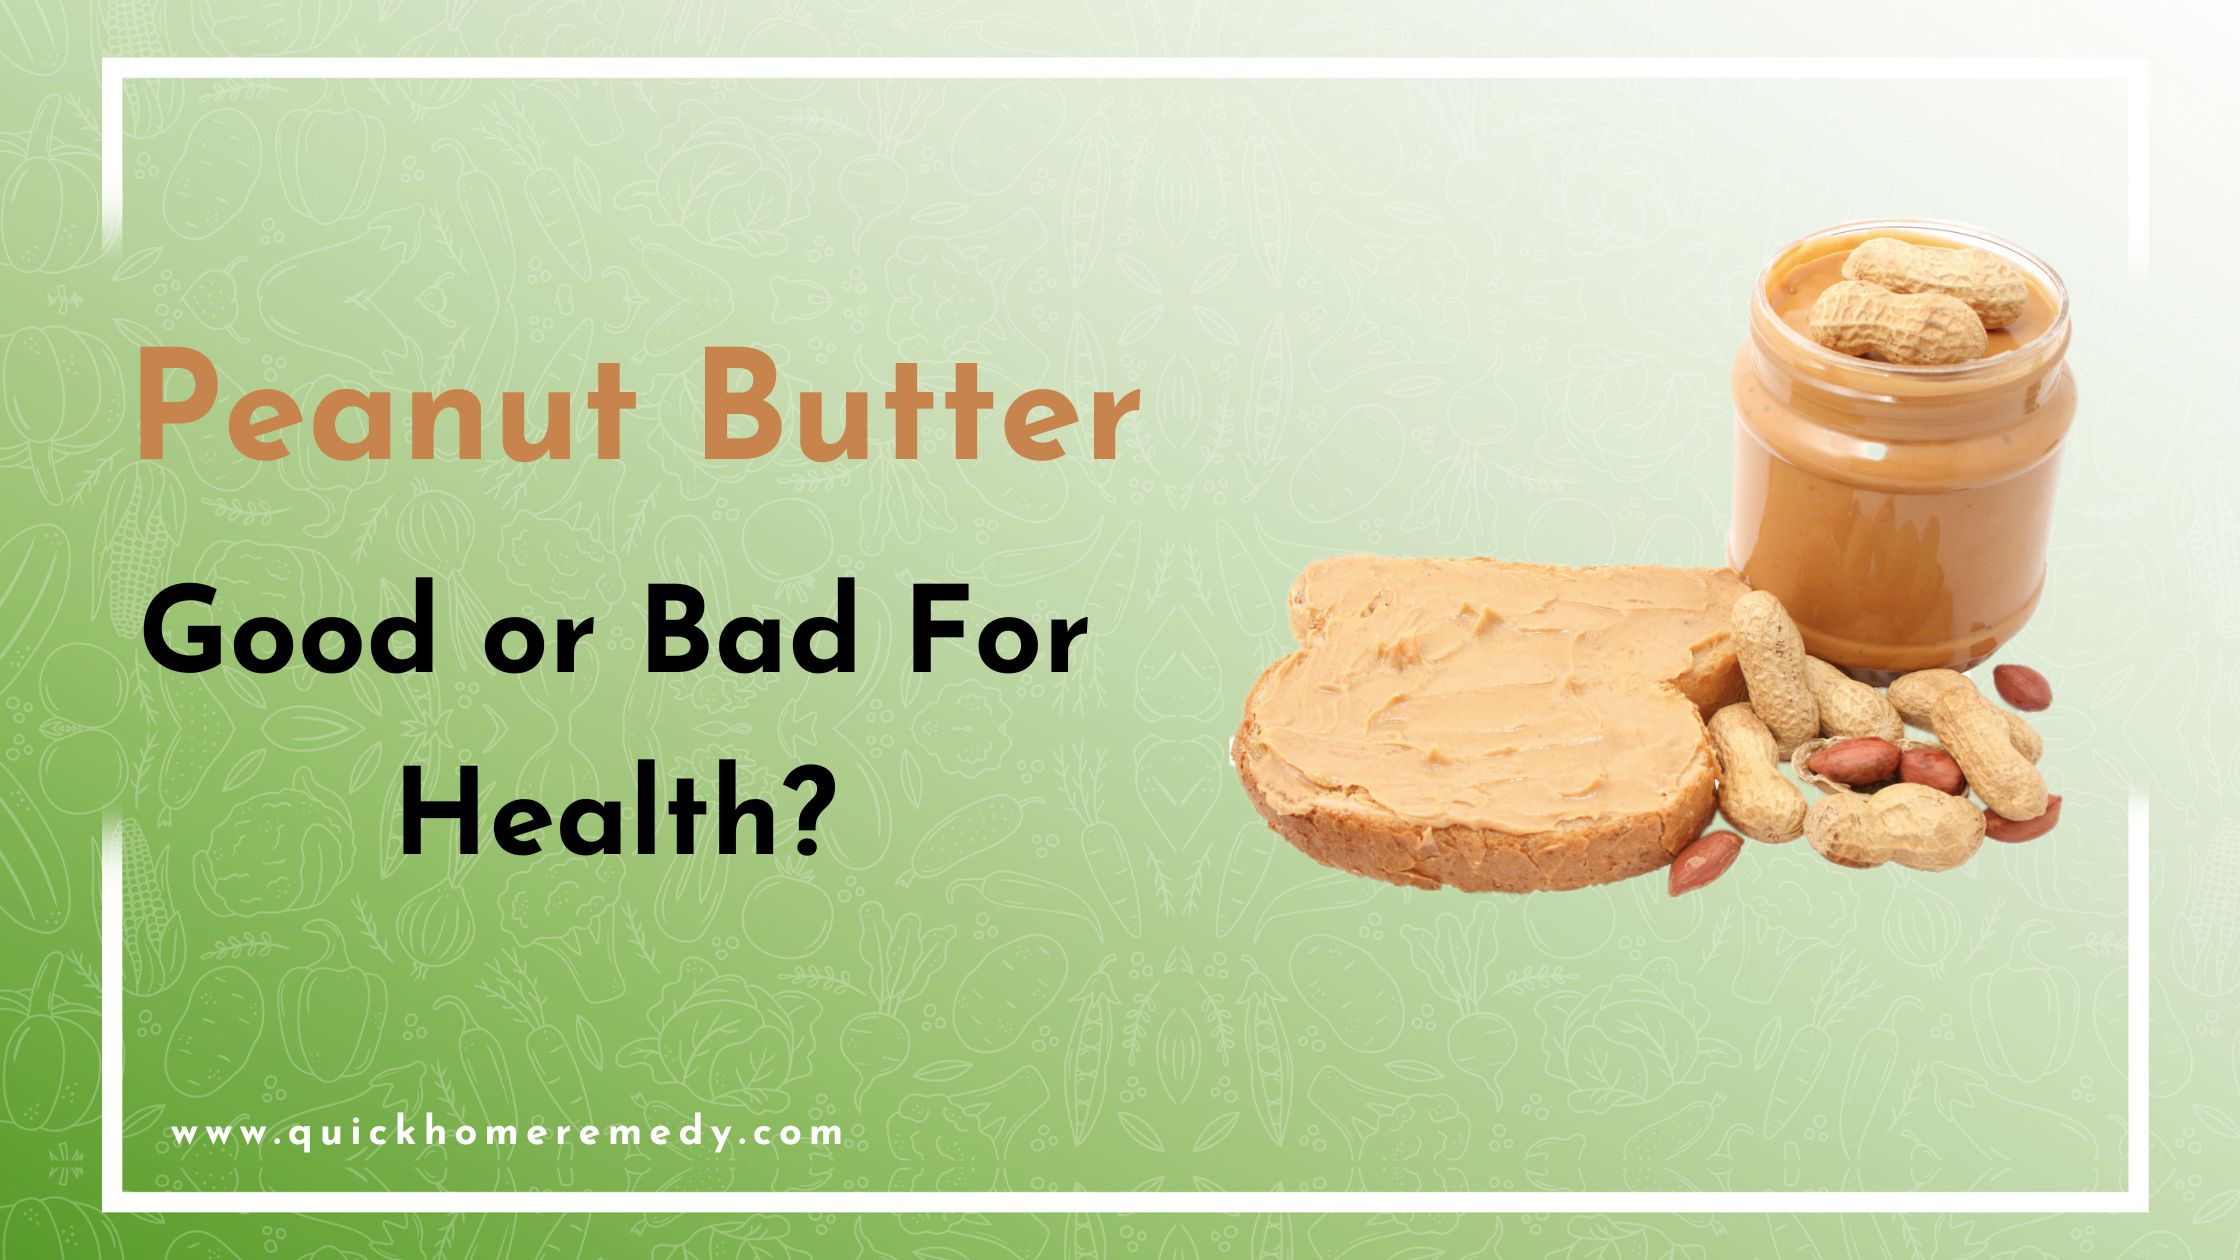 Is Peanut Butter Good or Bad For Health